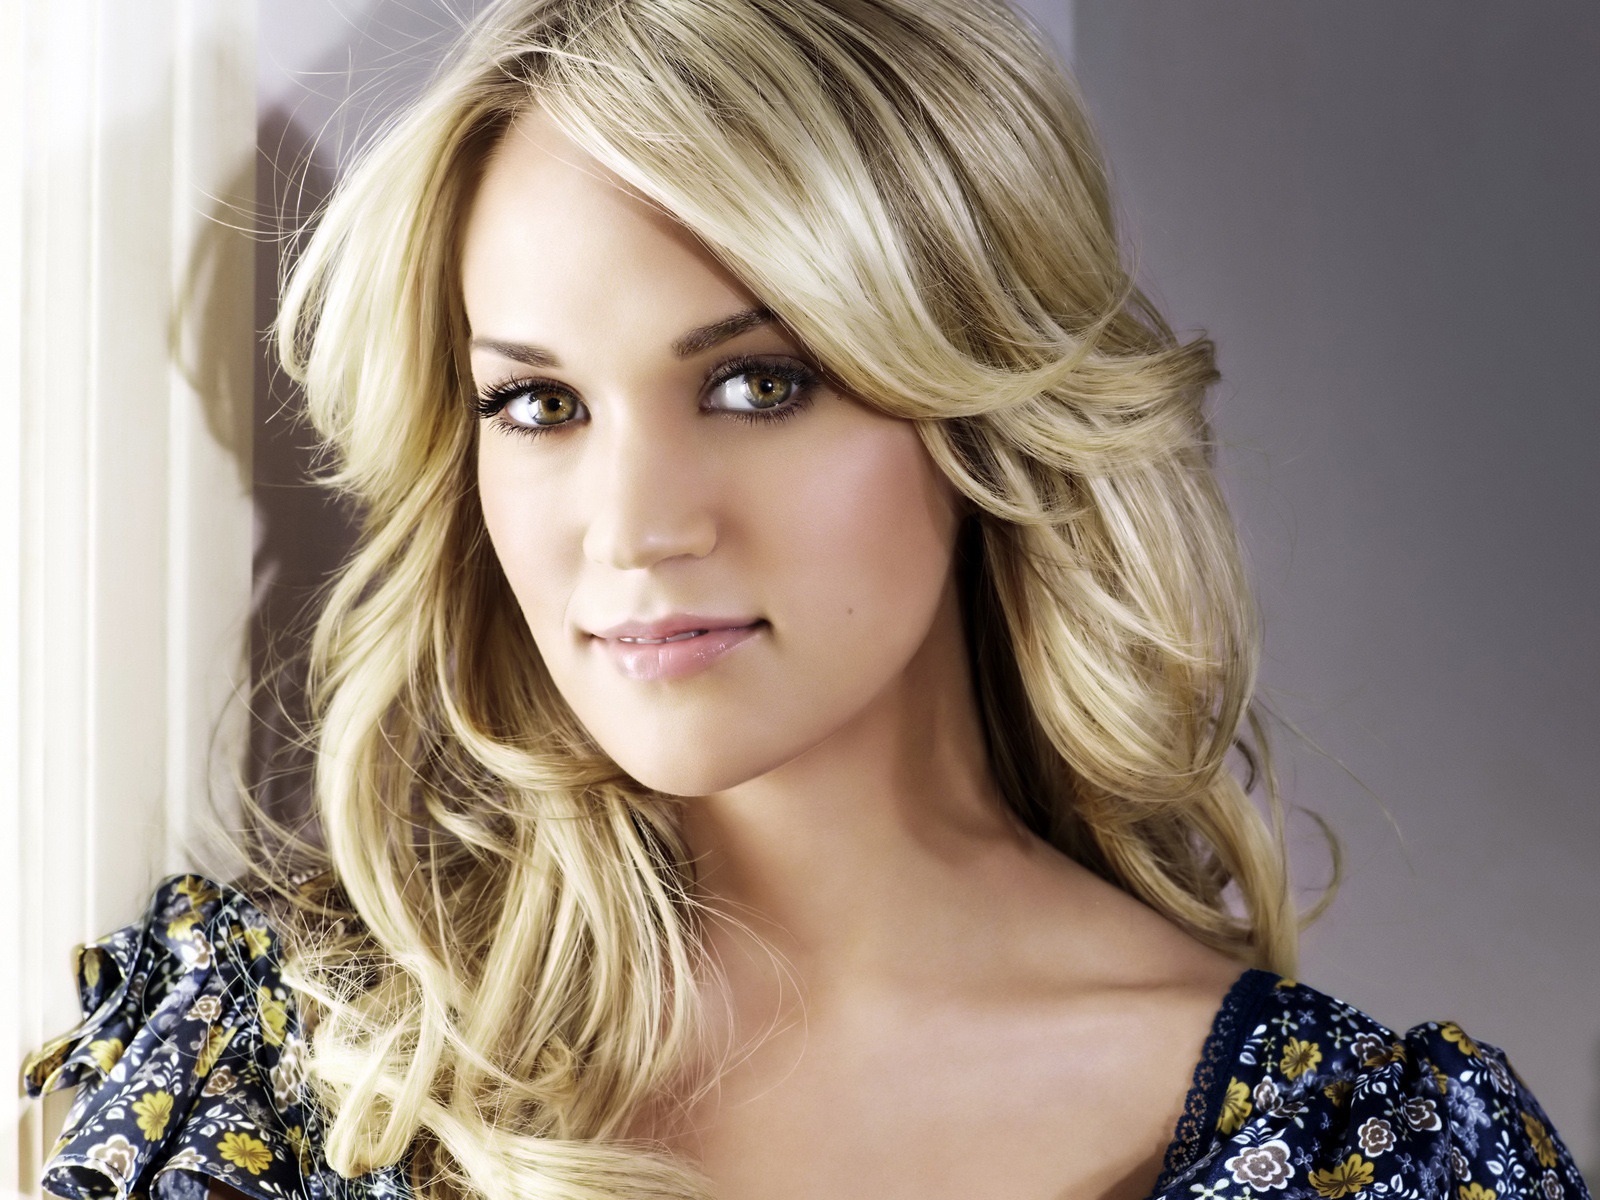 Amazing Carrie Underwood for 1600 x 1200 resolution